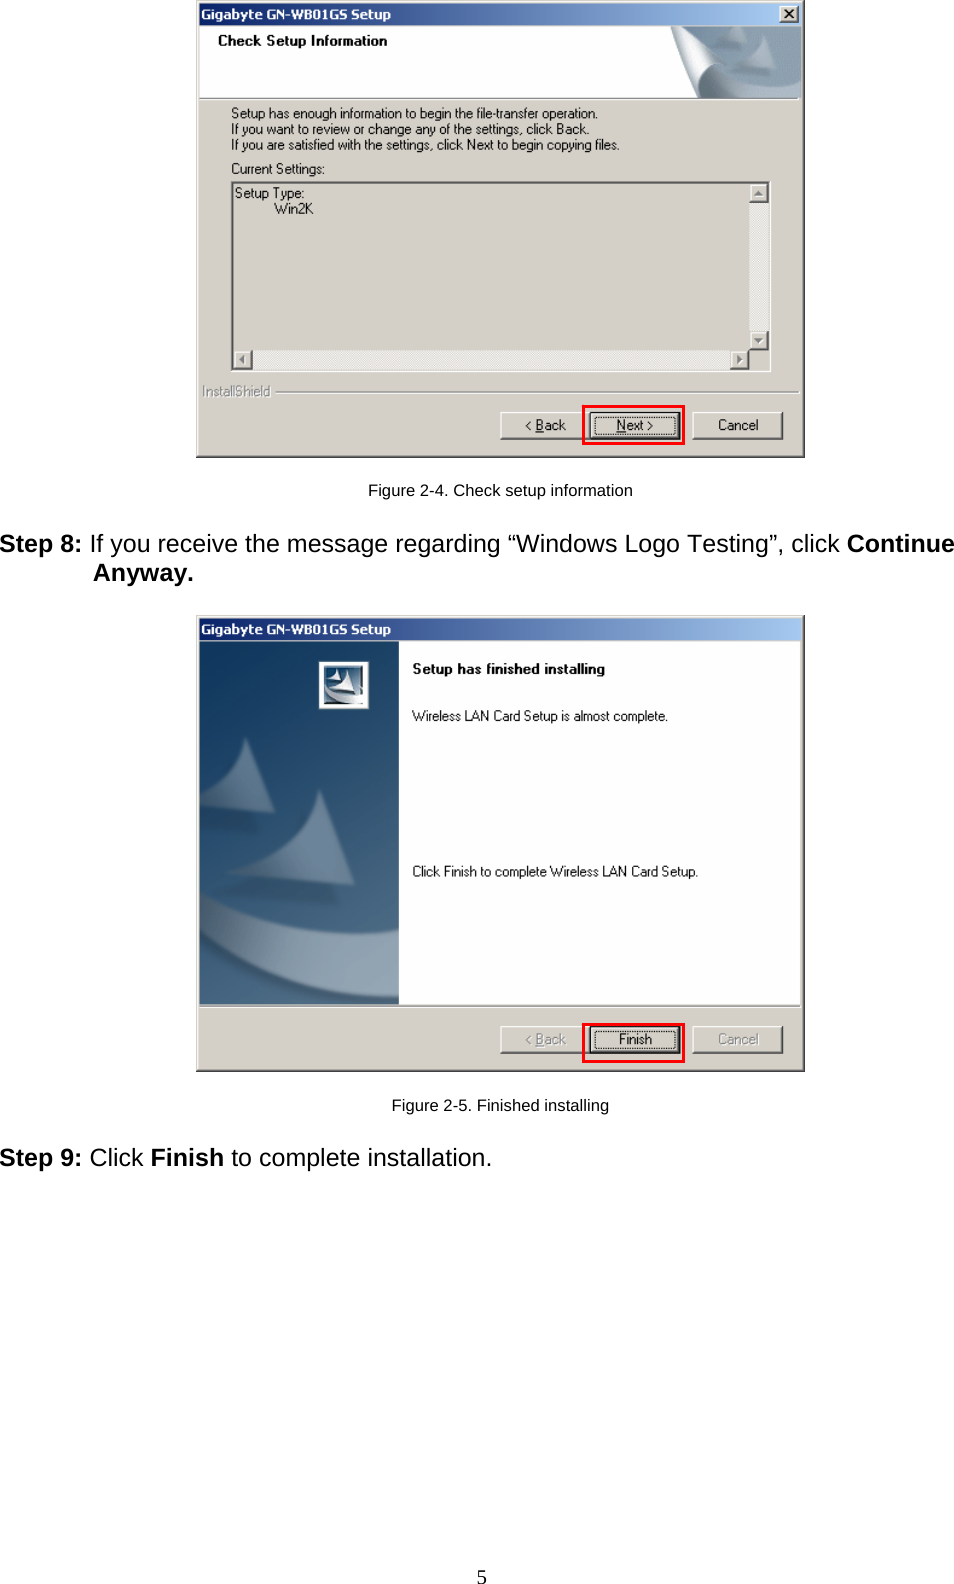 5     Figure 2-4. Check setup information  Step 8: If you receive the message regarding “Windows Logo Testing”, click Continue Anyway.     Figure 2-5. Finished installing  Step 9: Click Finish to complete installation.  